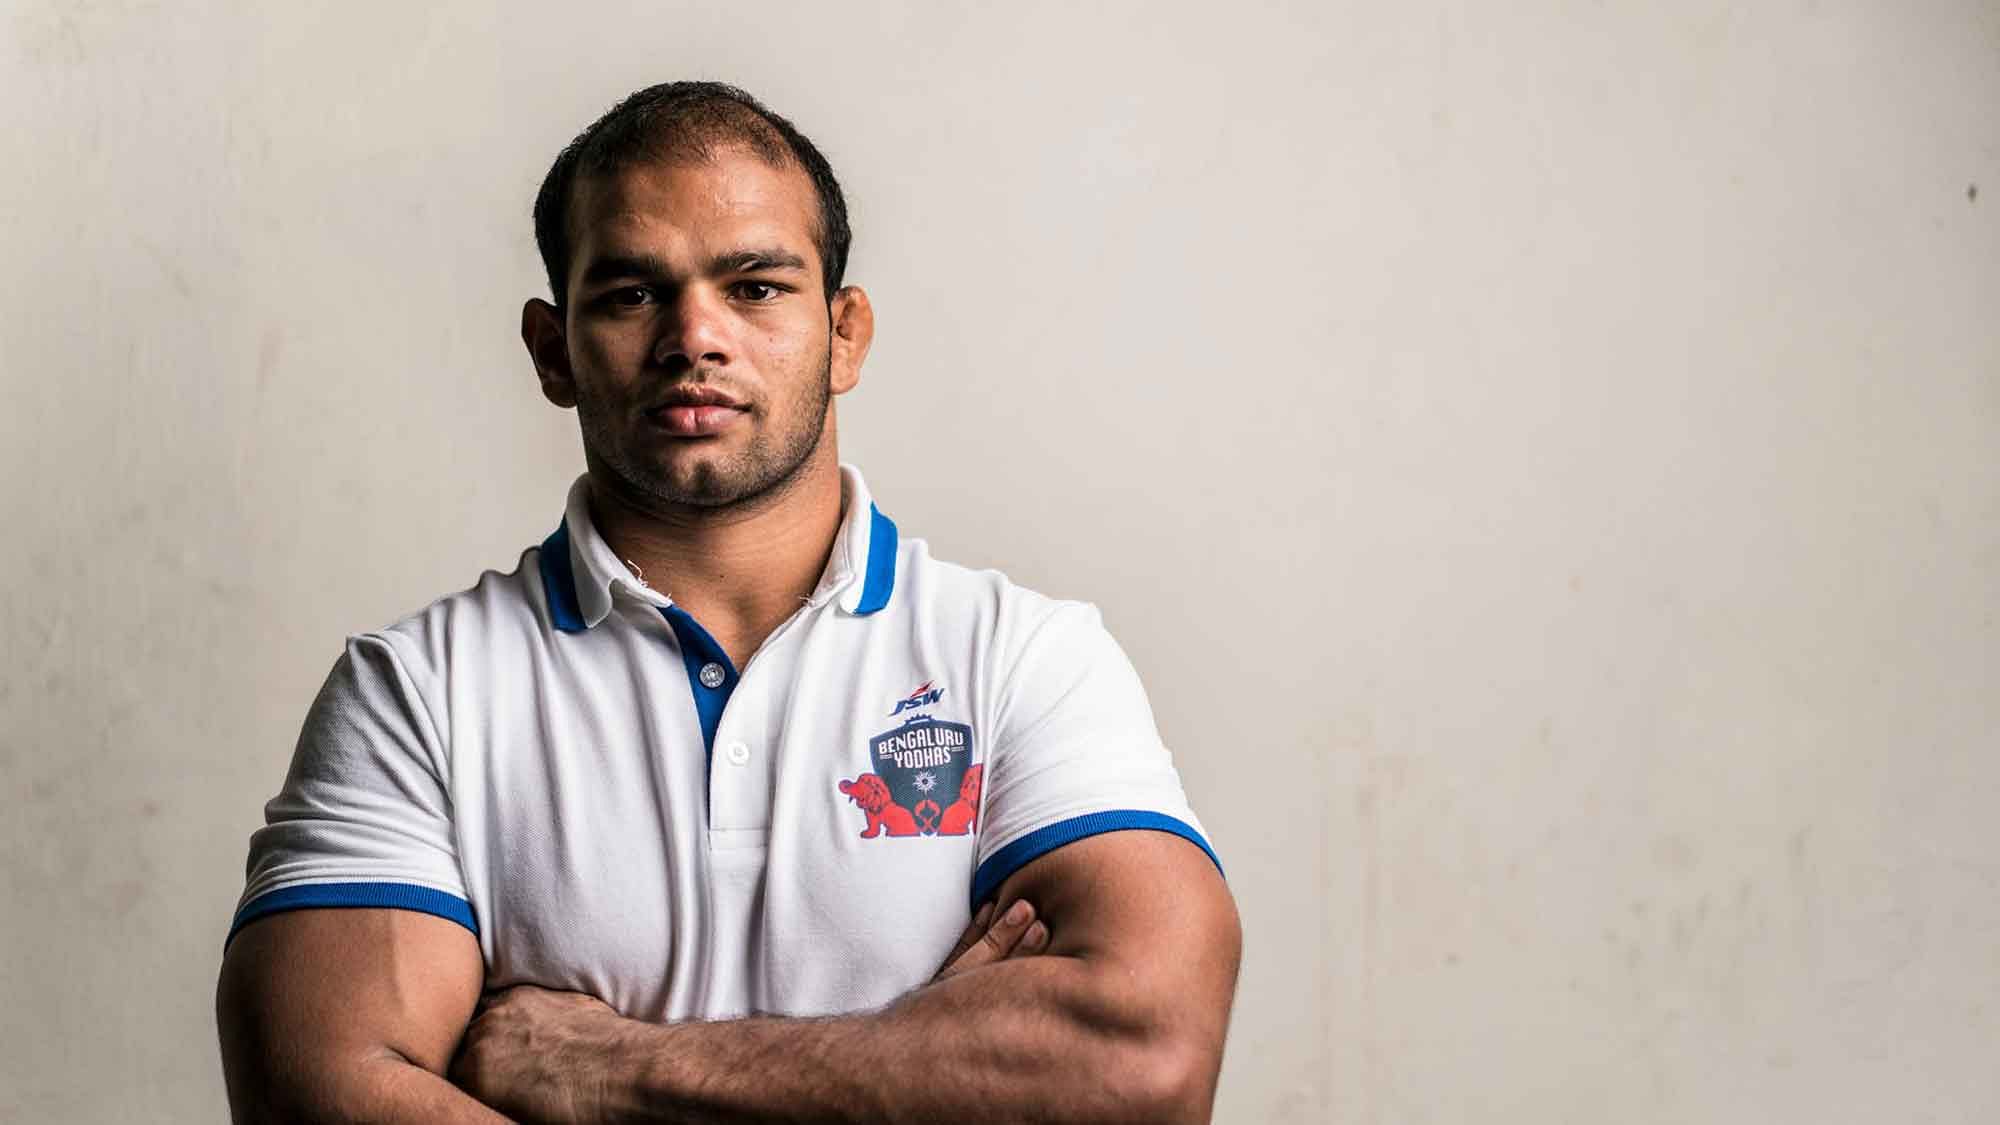 Narsingh will be eyeing to secure an Olympic quota in his favourite 74-kg category once he returns from his ban.